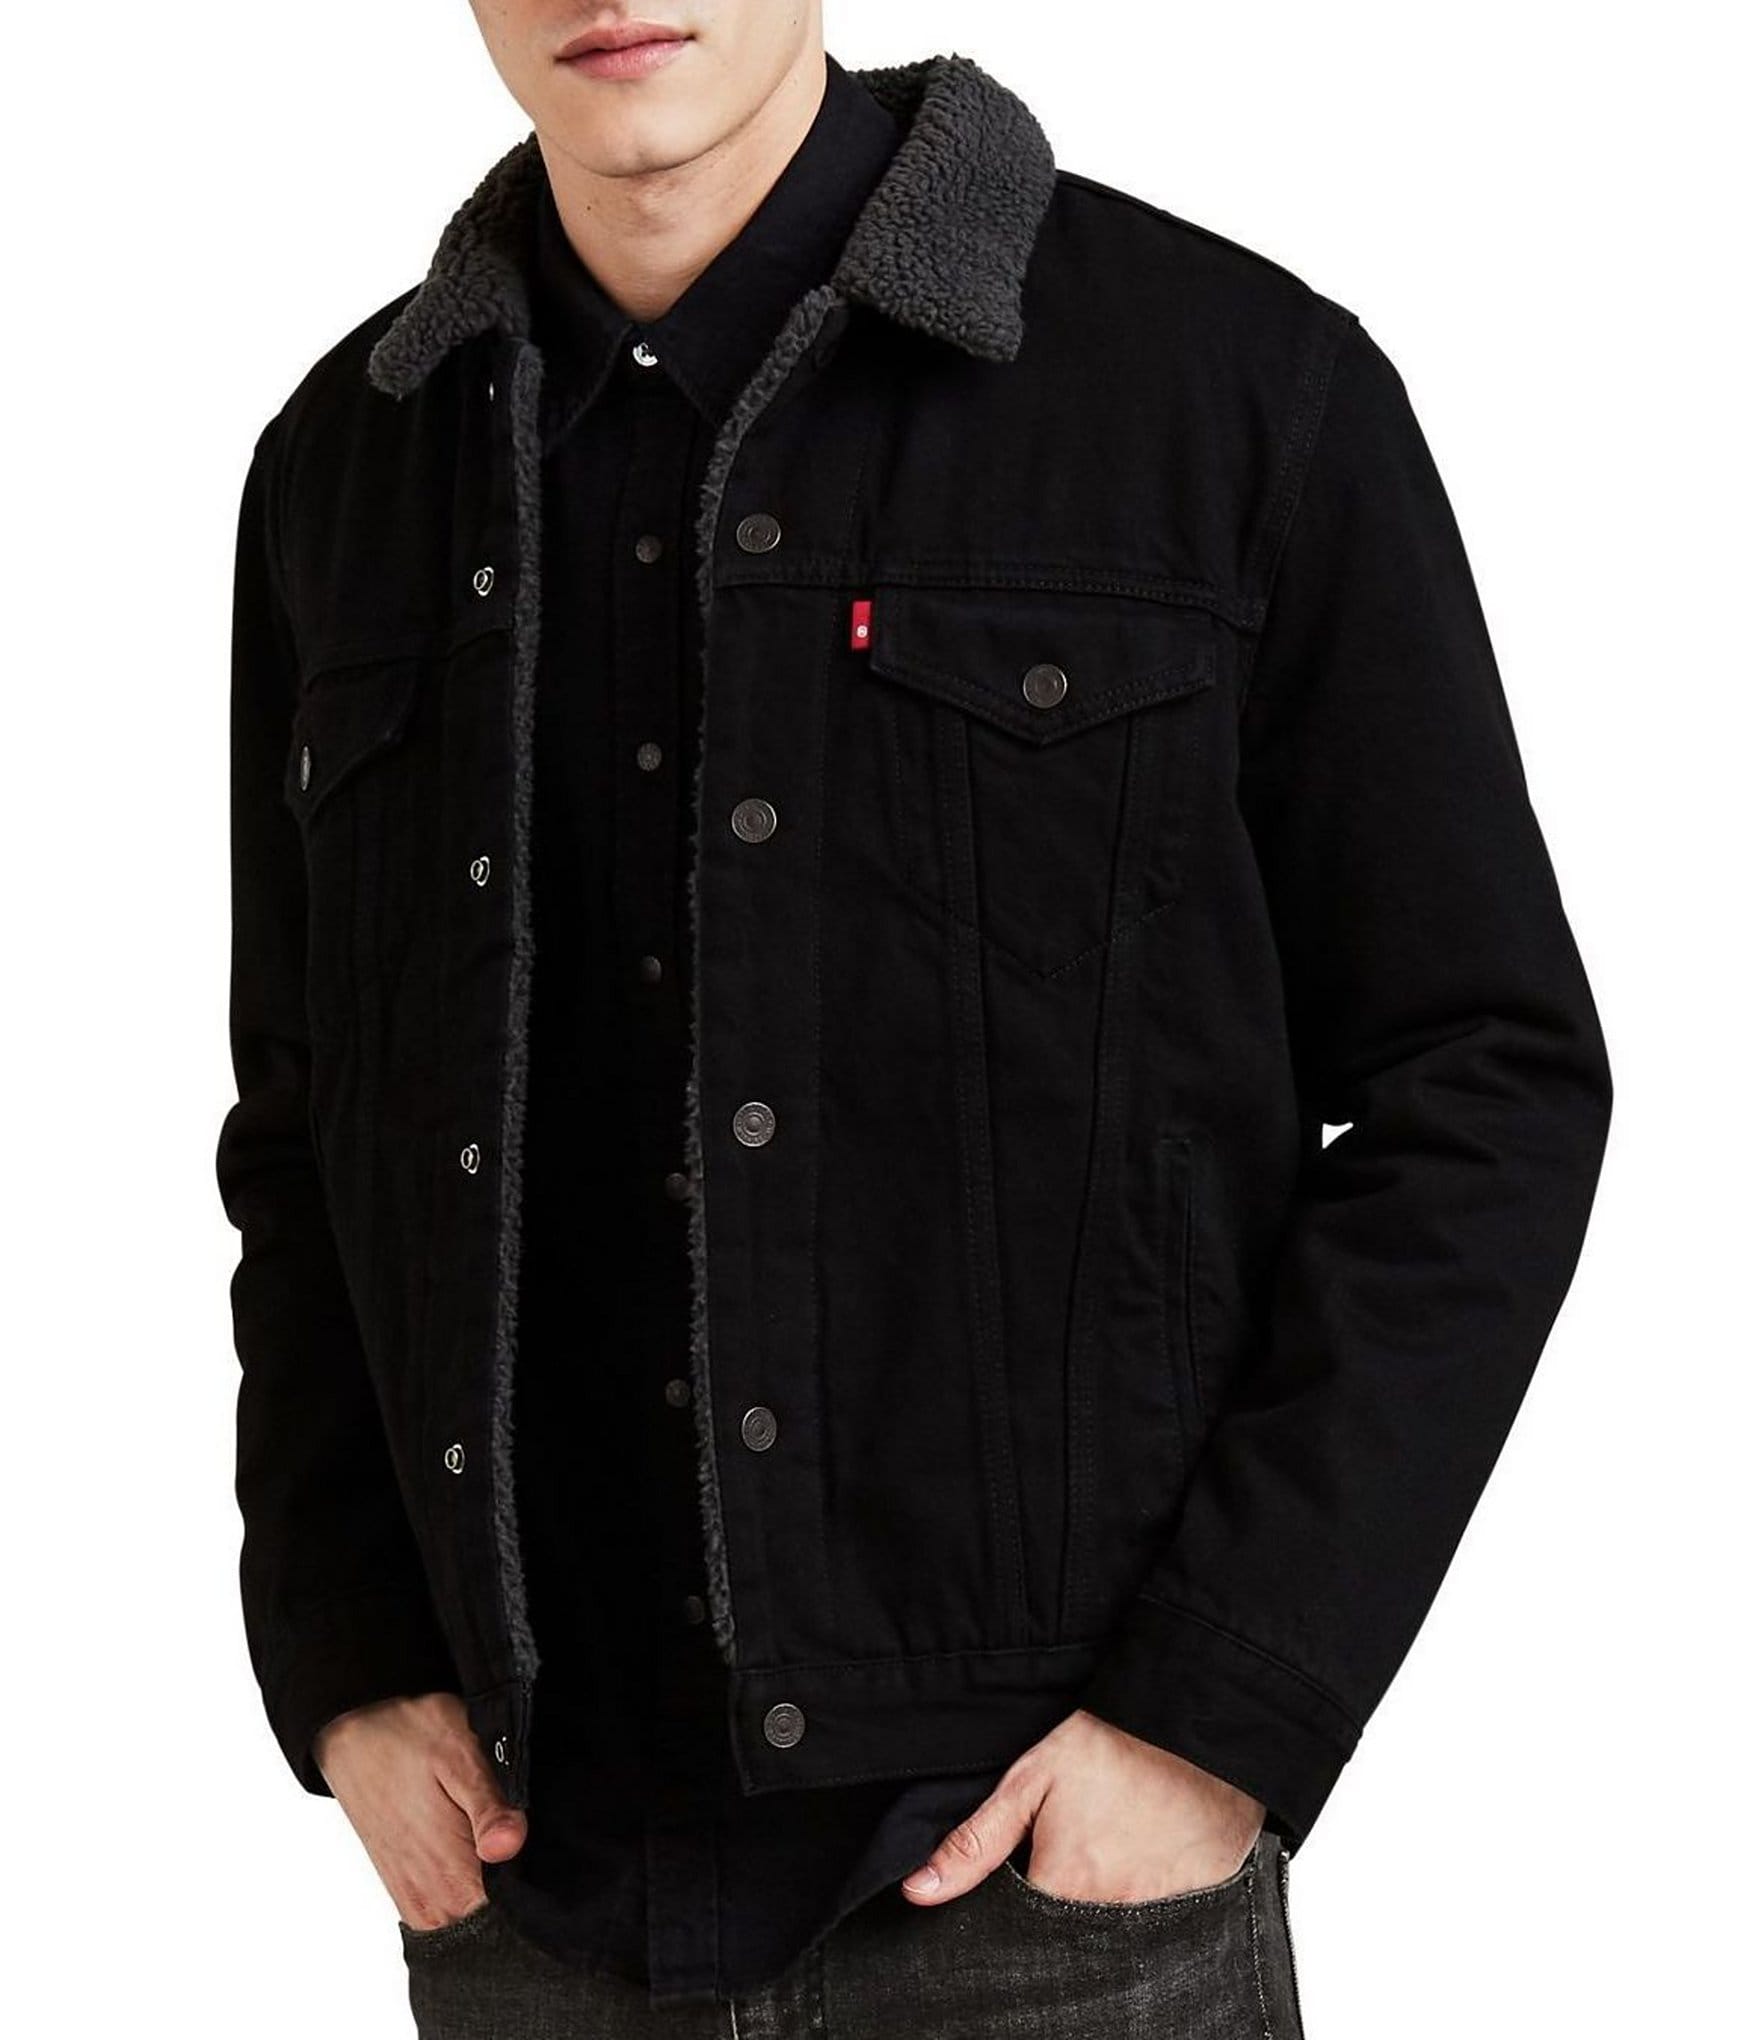 levis jacket with fur collar